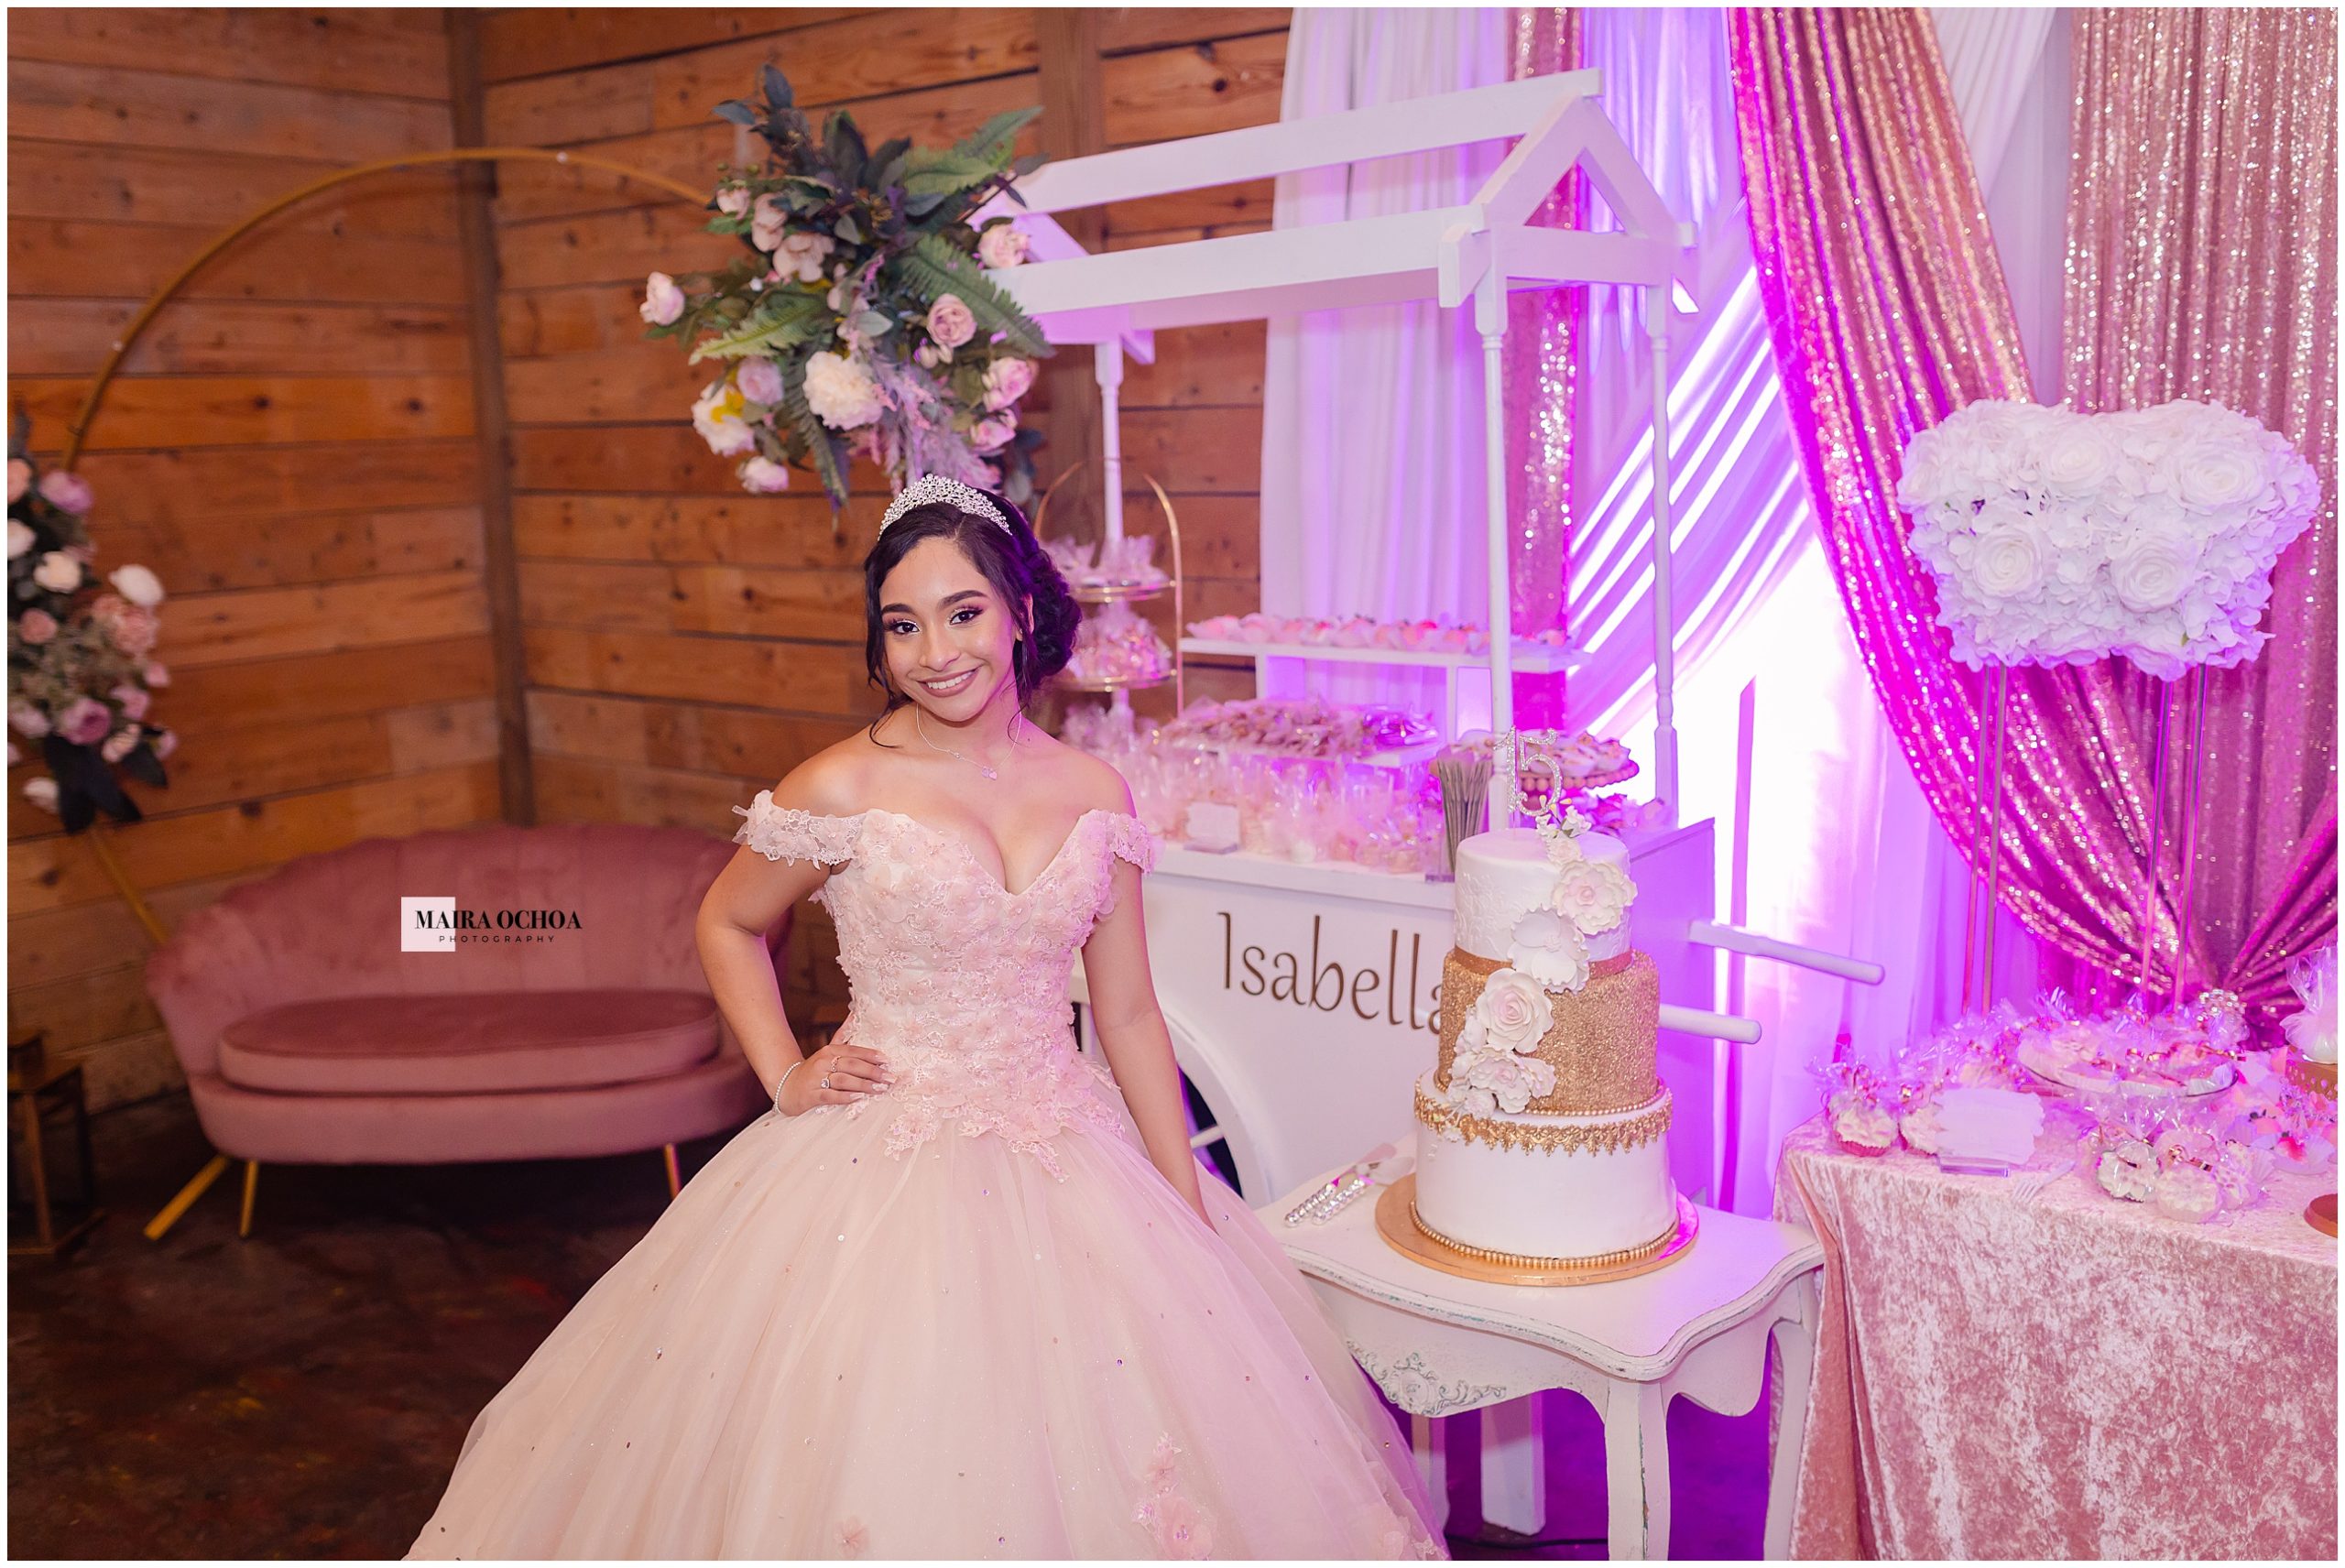 Quinceanera and cake